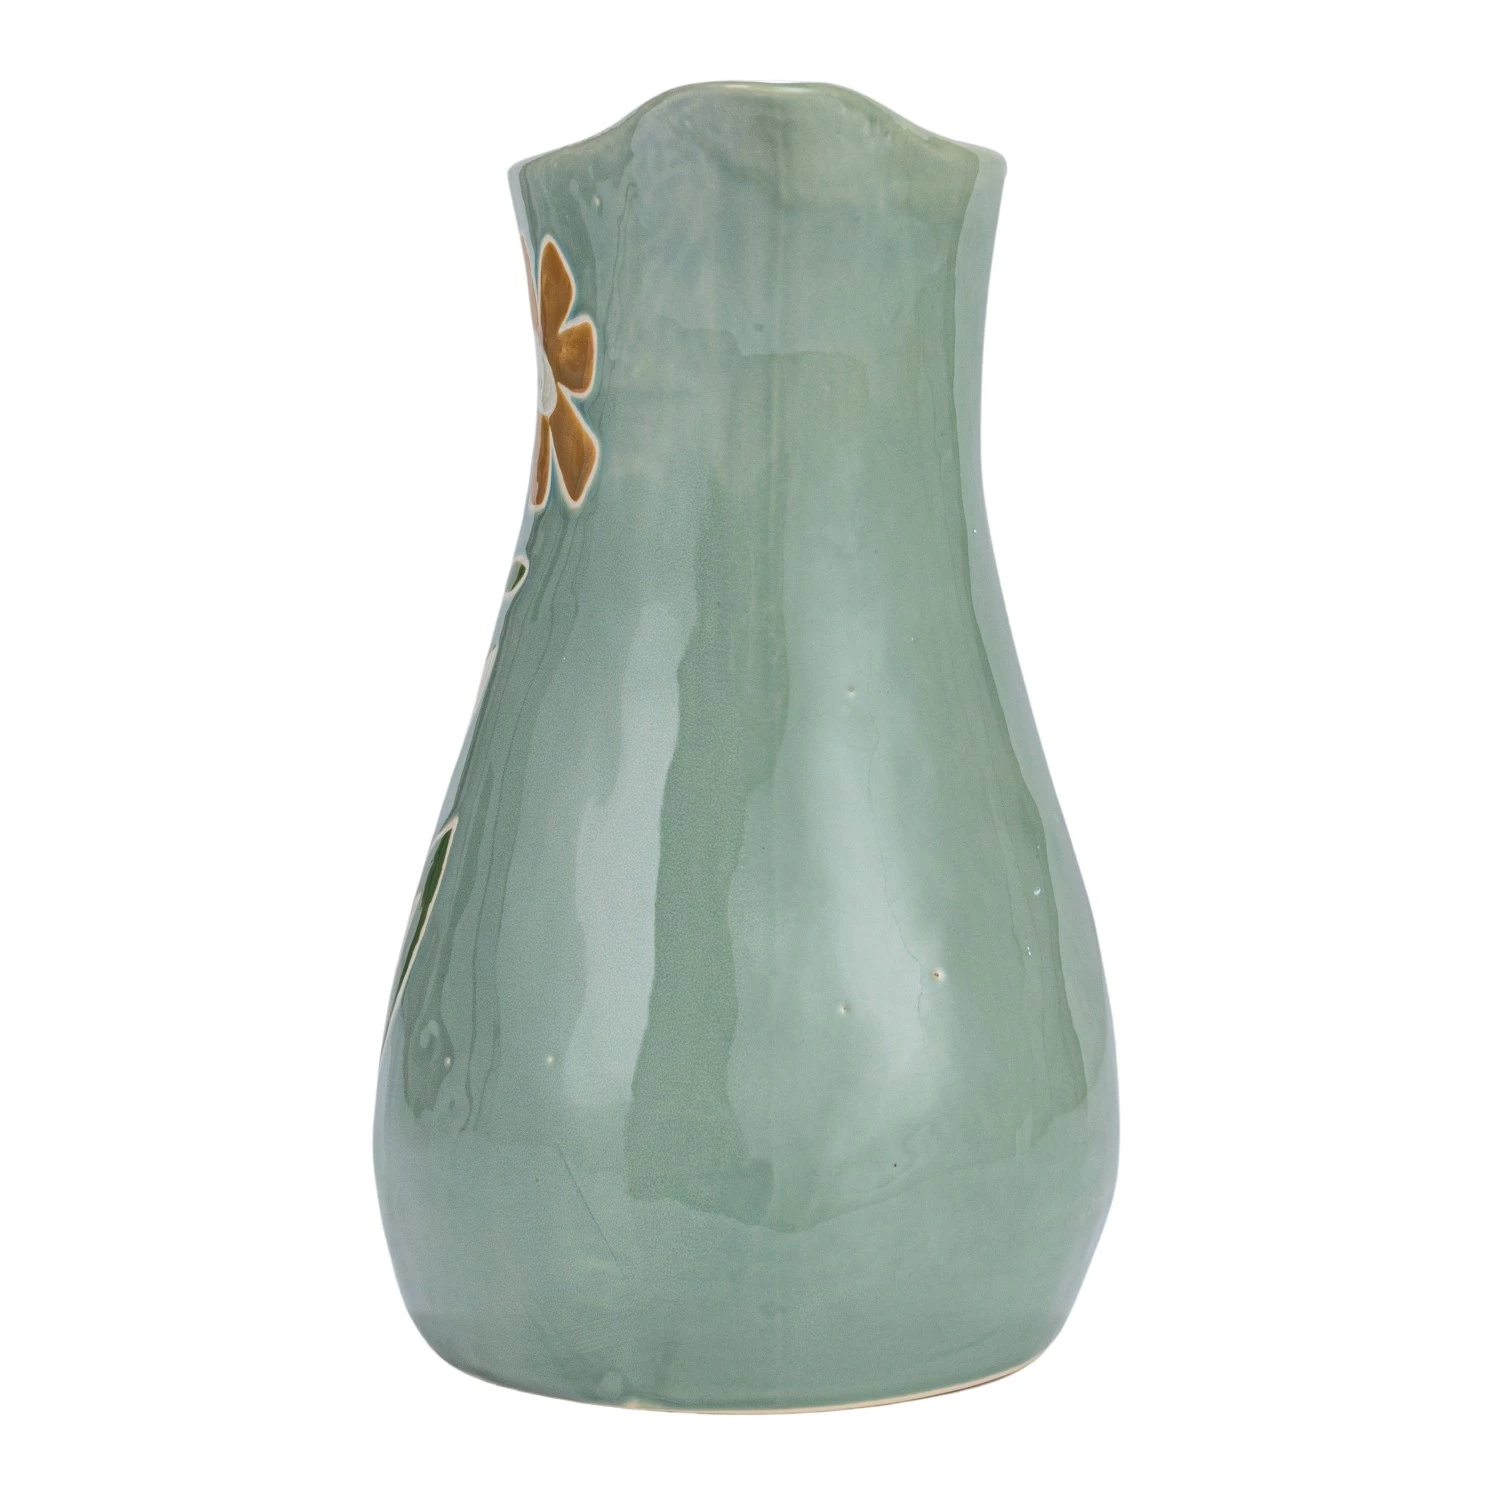 Sage Green Hand-Painted Stoneware Pitcher with Wax Relief Flowers - 2 Quart - Mellow Monkey